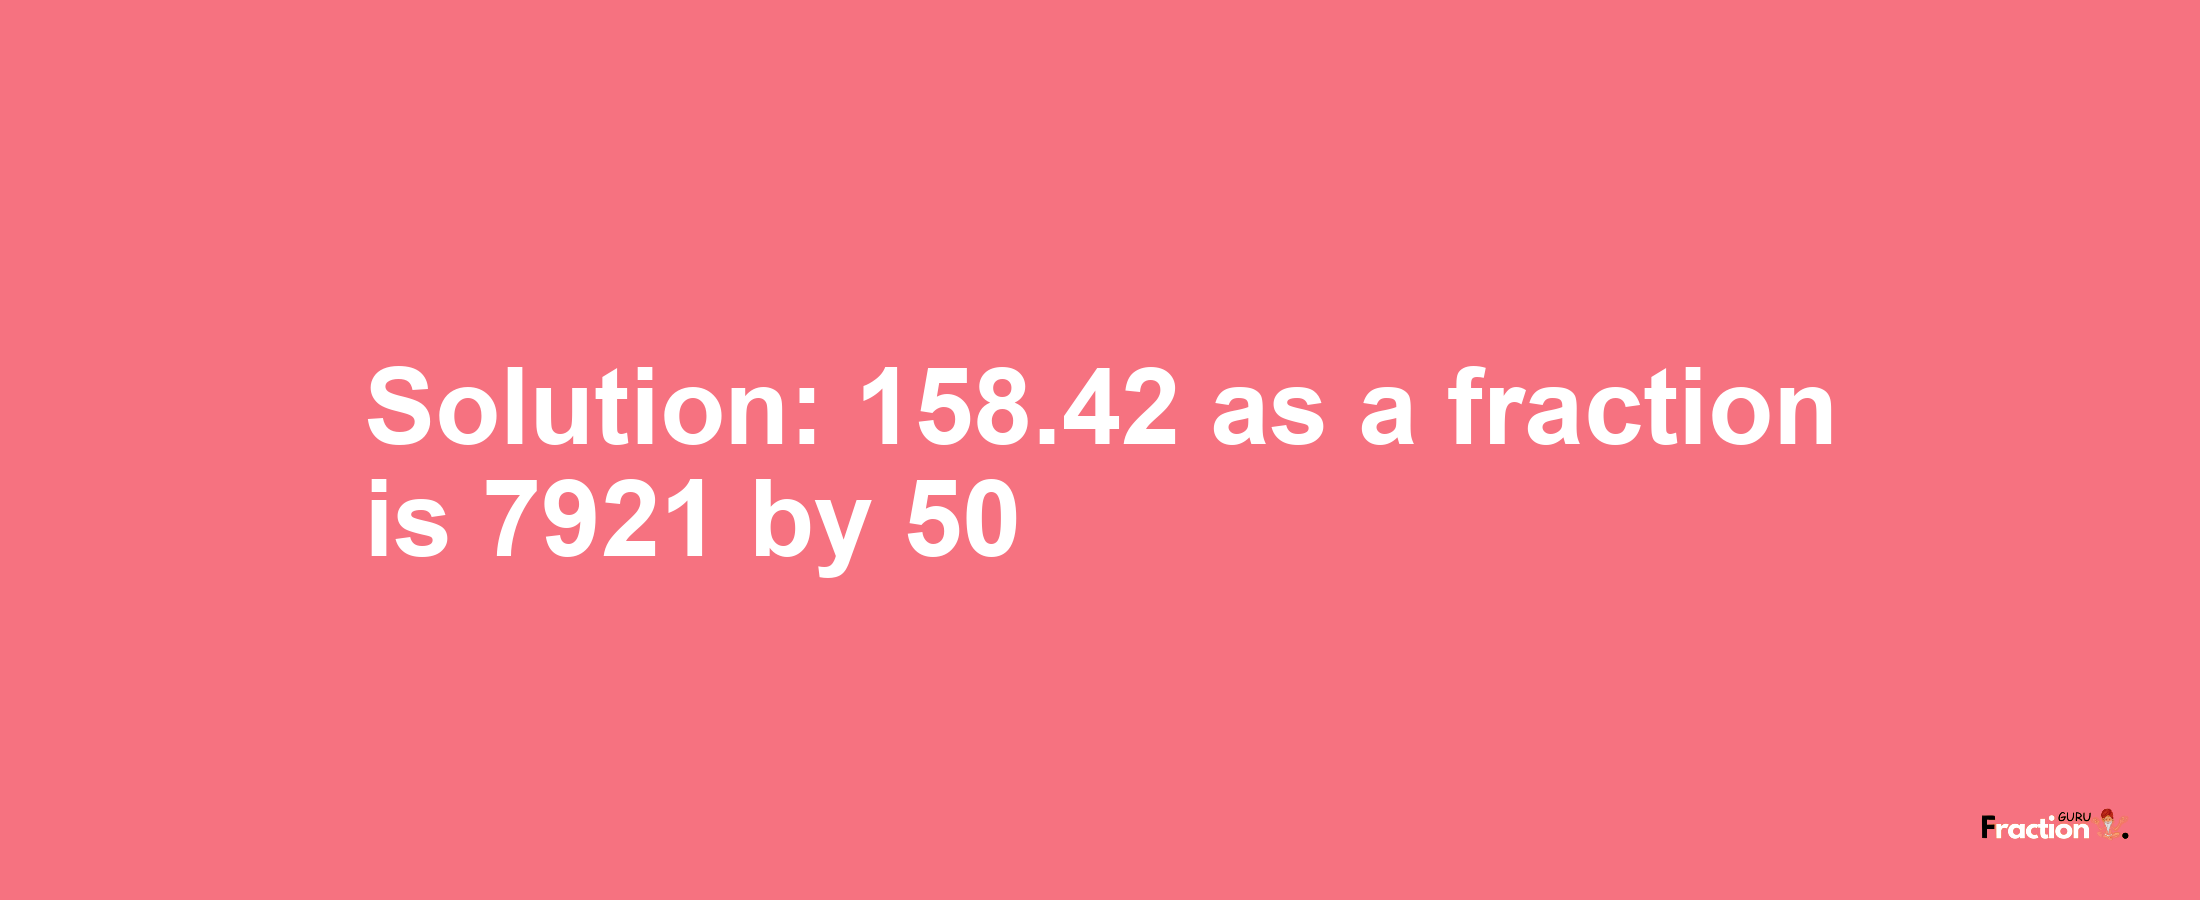 Solution:158.42 as a fraction is 7921/50